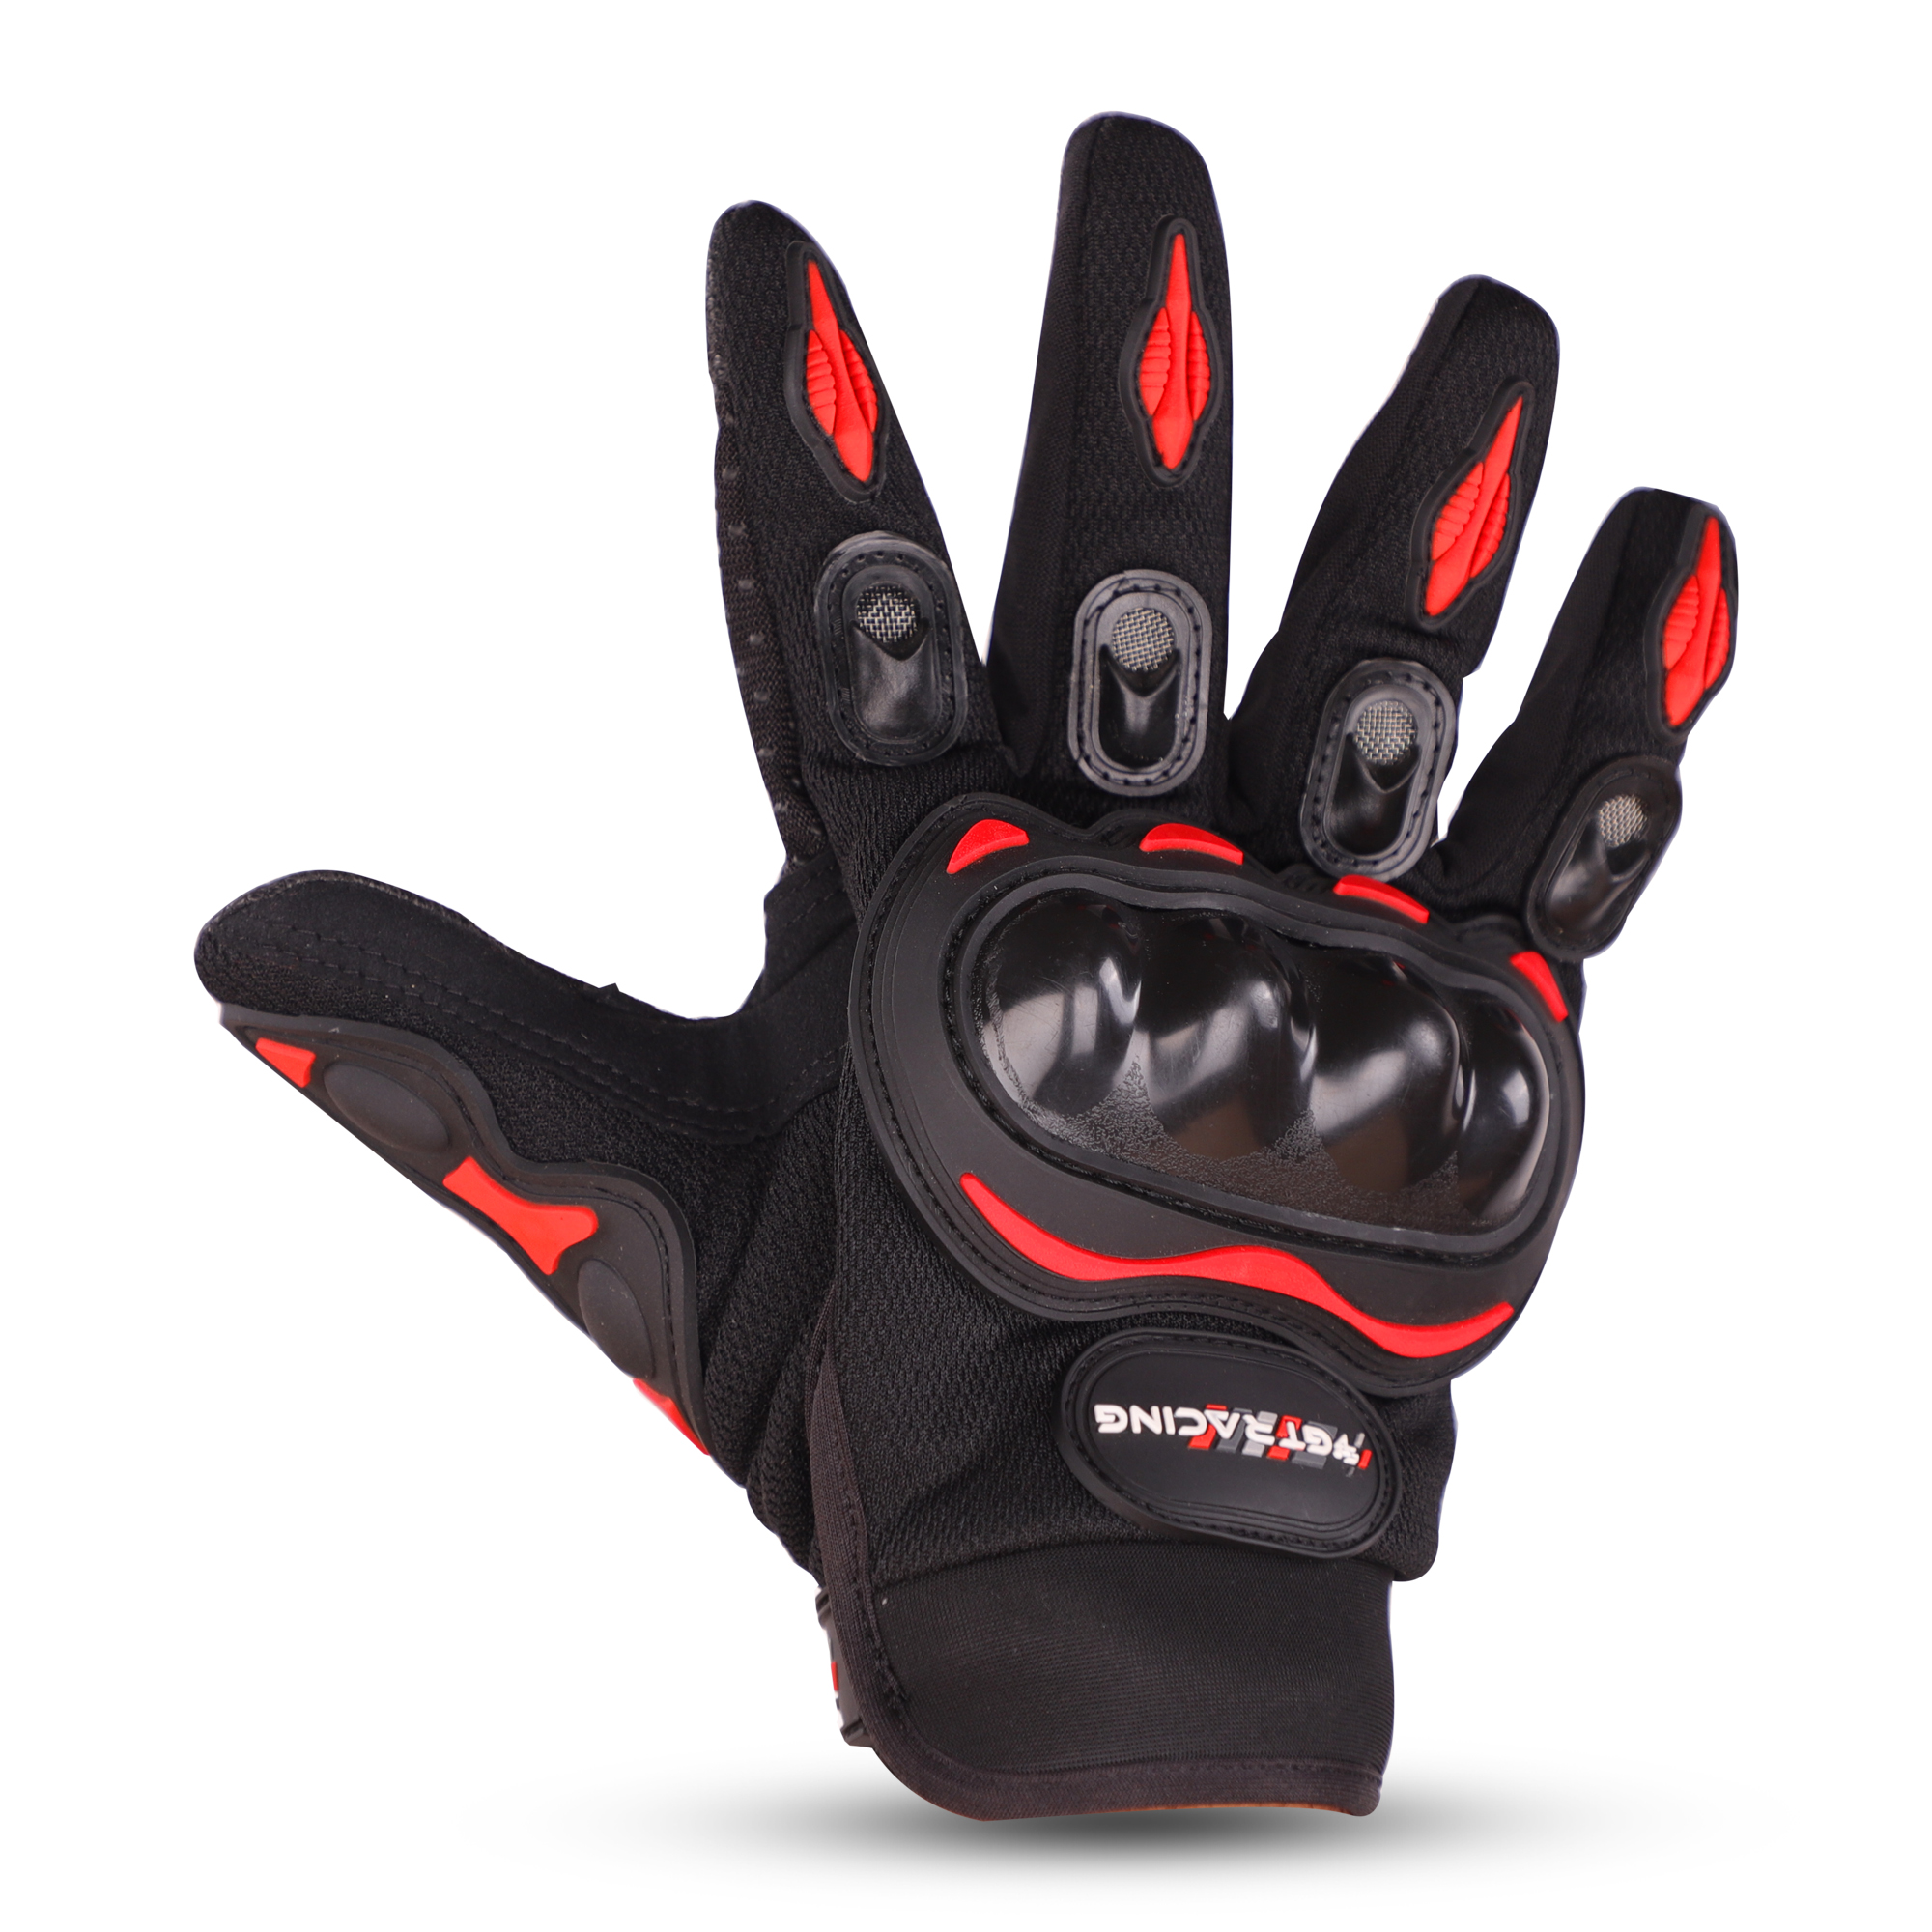 Steelbird GT-01 Full Finger Bike Riding Gloves with Touch Screen Sensitivity at Thumb and Index Finger, Protective Off-Road Motorbike Racing (Red)